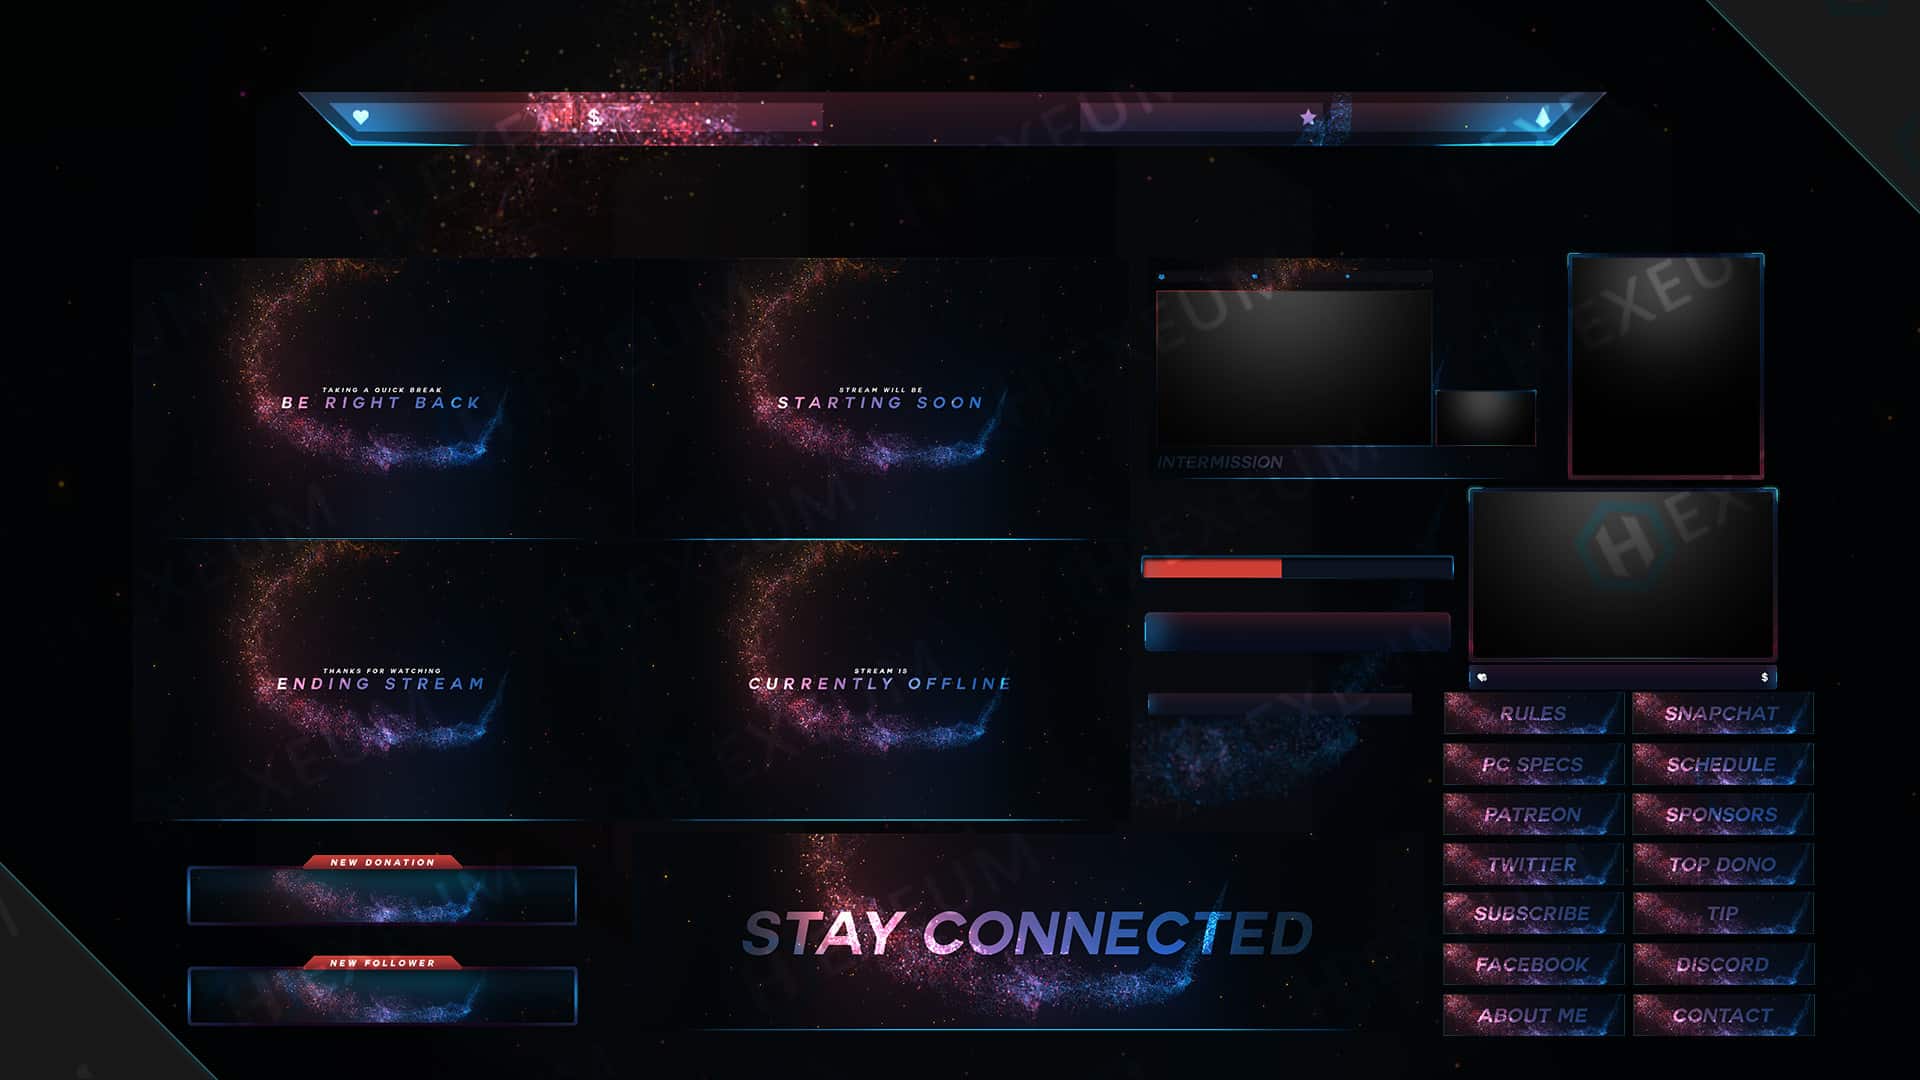 Intermission screen overlays (Just Chatting)